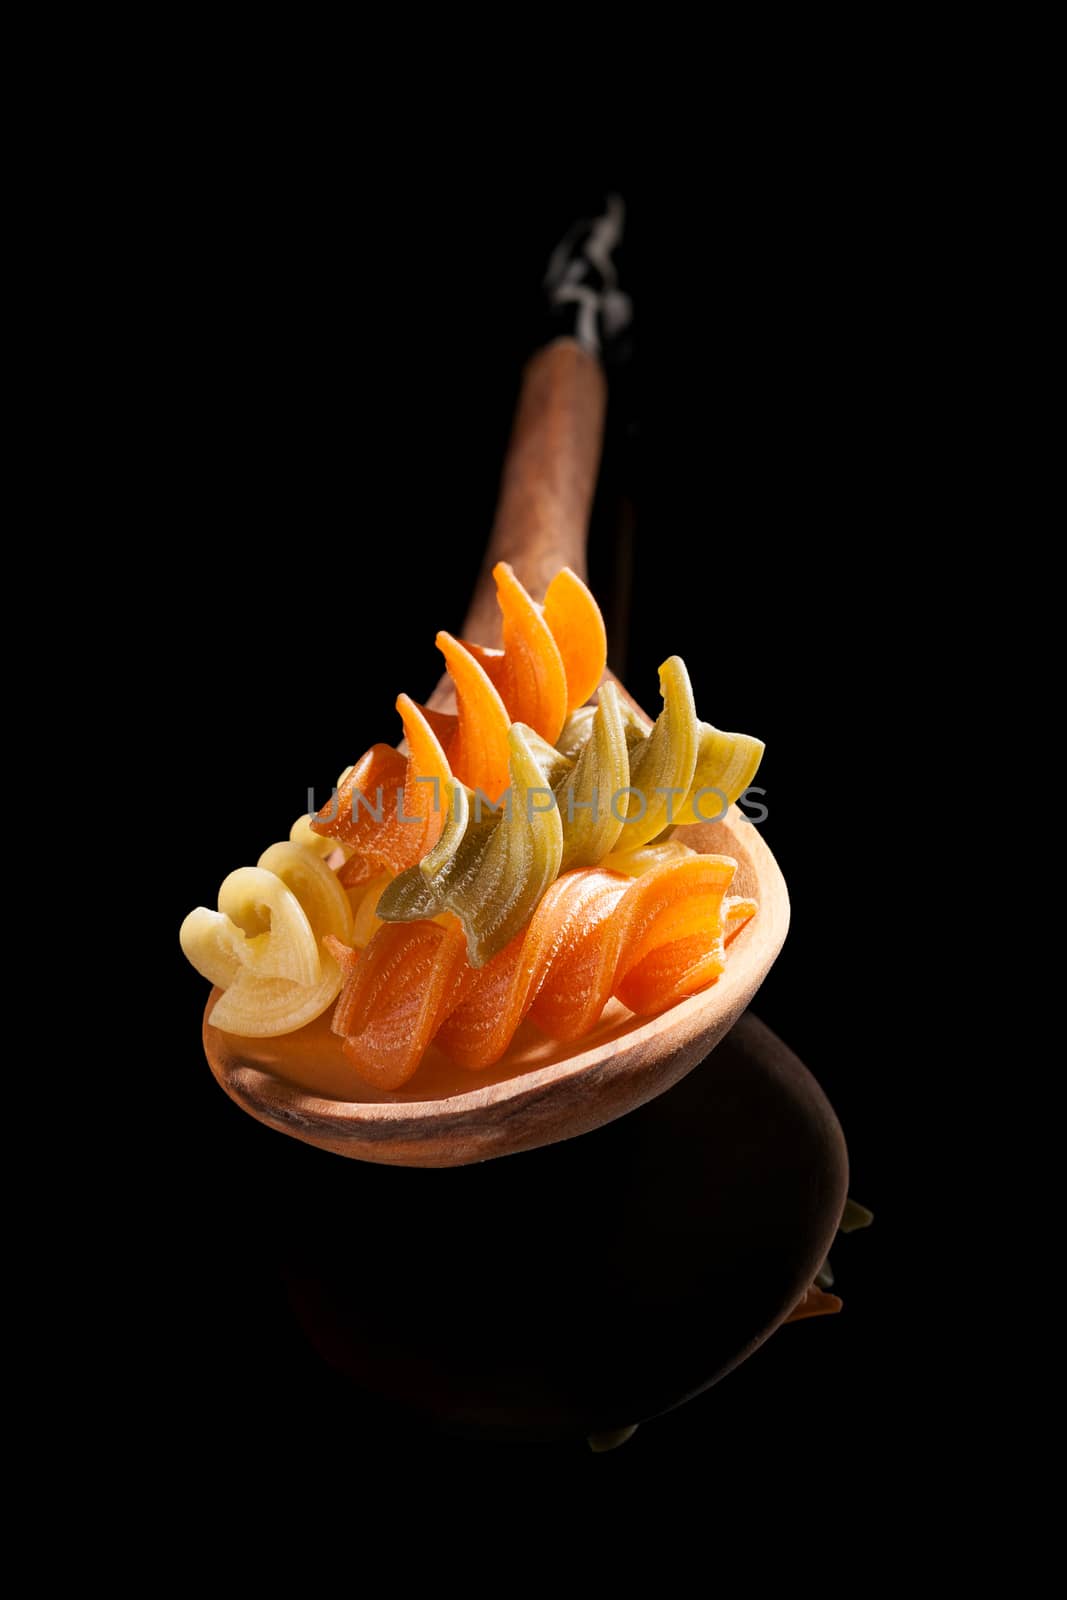 Fusilli on wooden spoon isolated on black background. Culinary pasta cooking background.